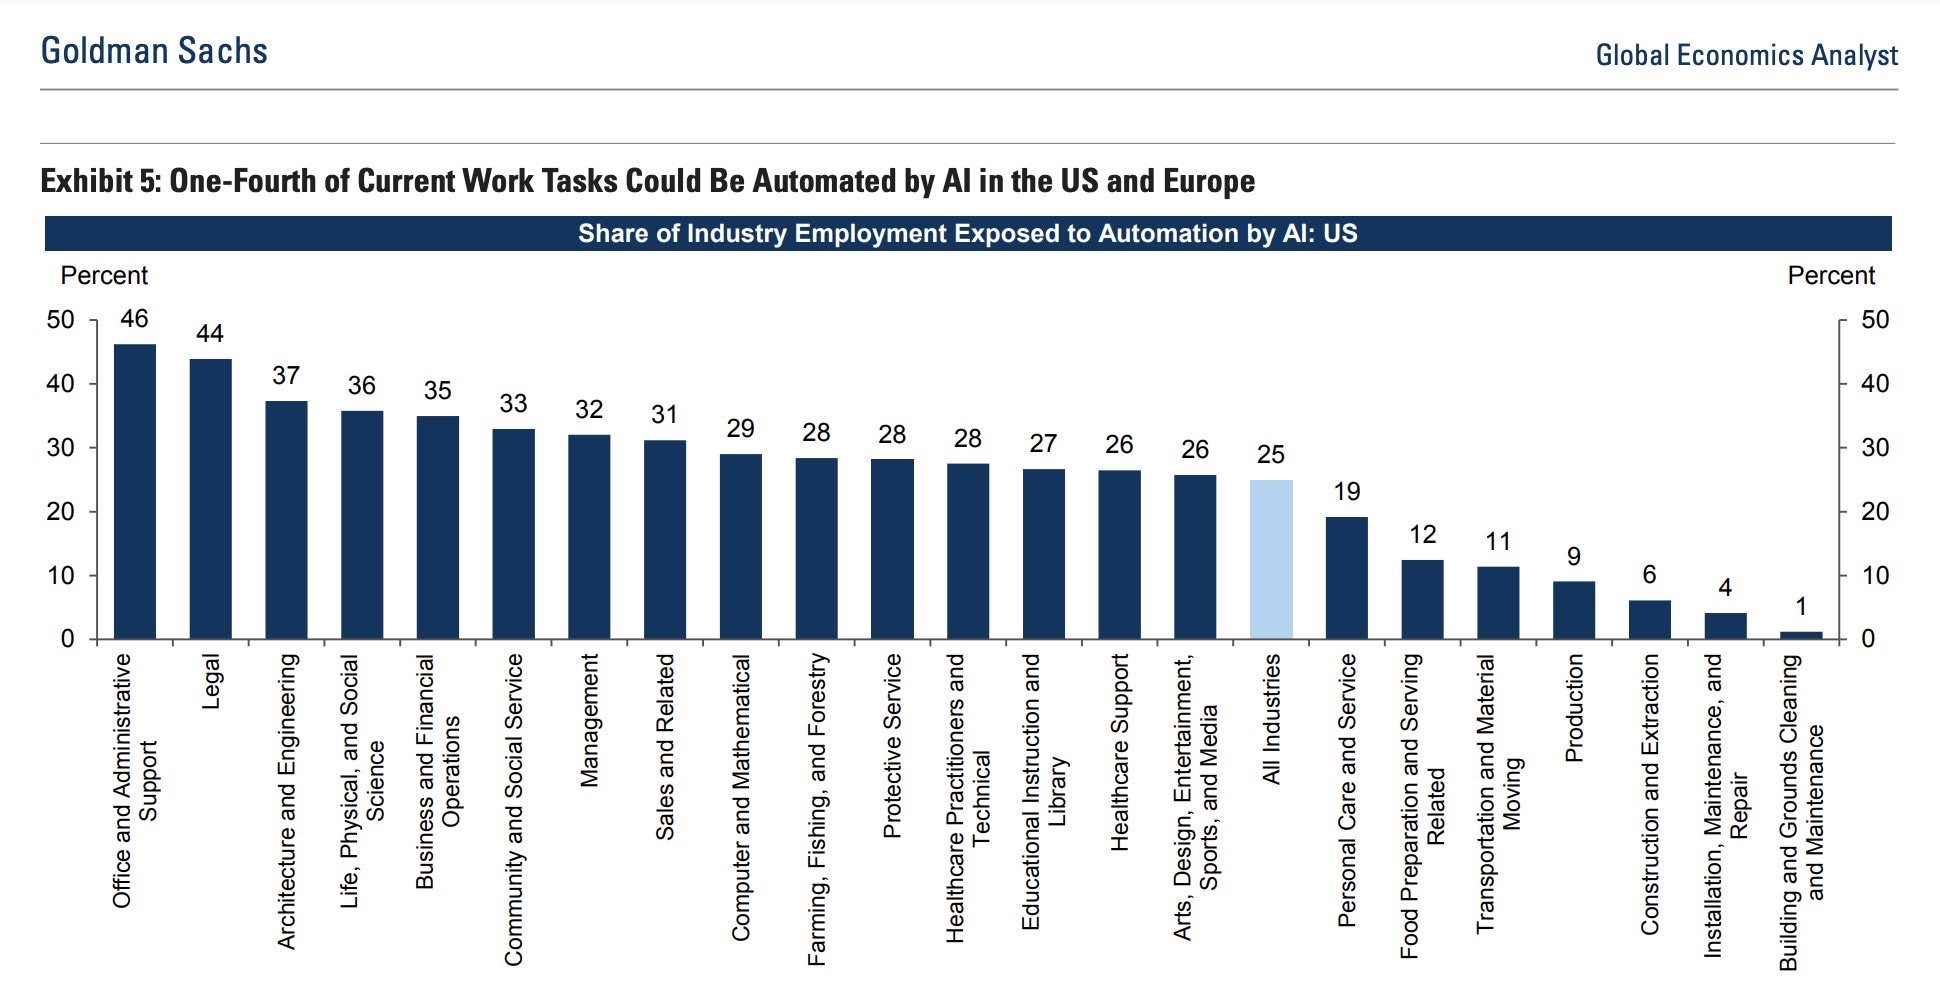 chart covers 22 different industries and measures the impact AI Technology would have; numbers vary from 1%, building and ground cleaning and maintenance, to 46%, office and administrative support